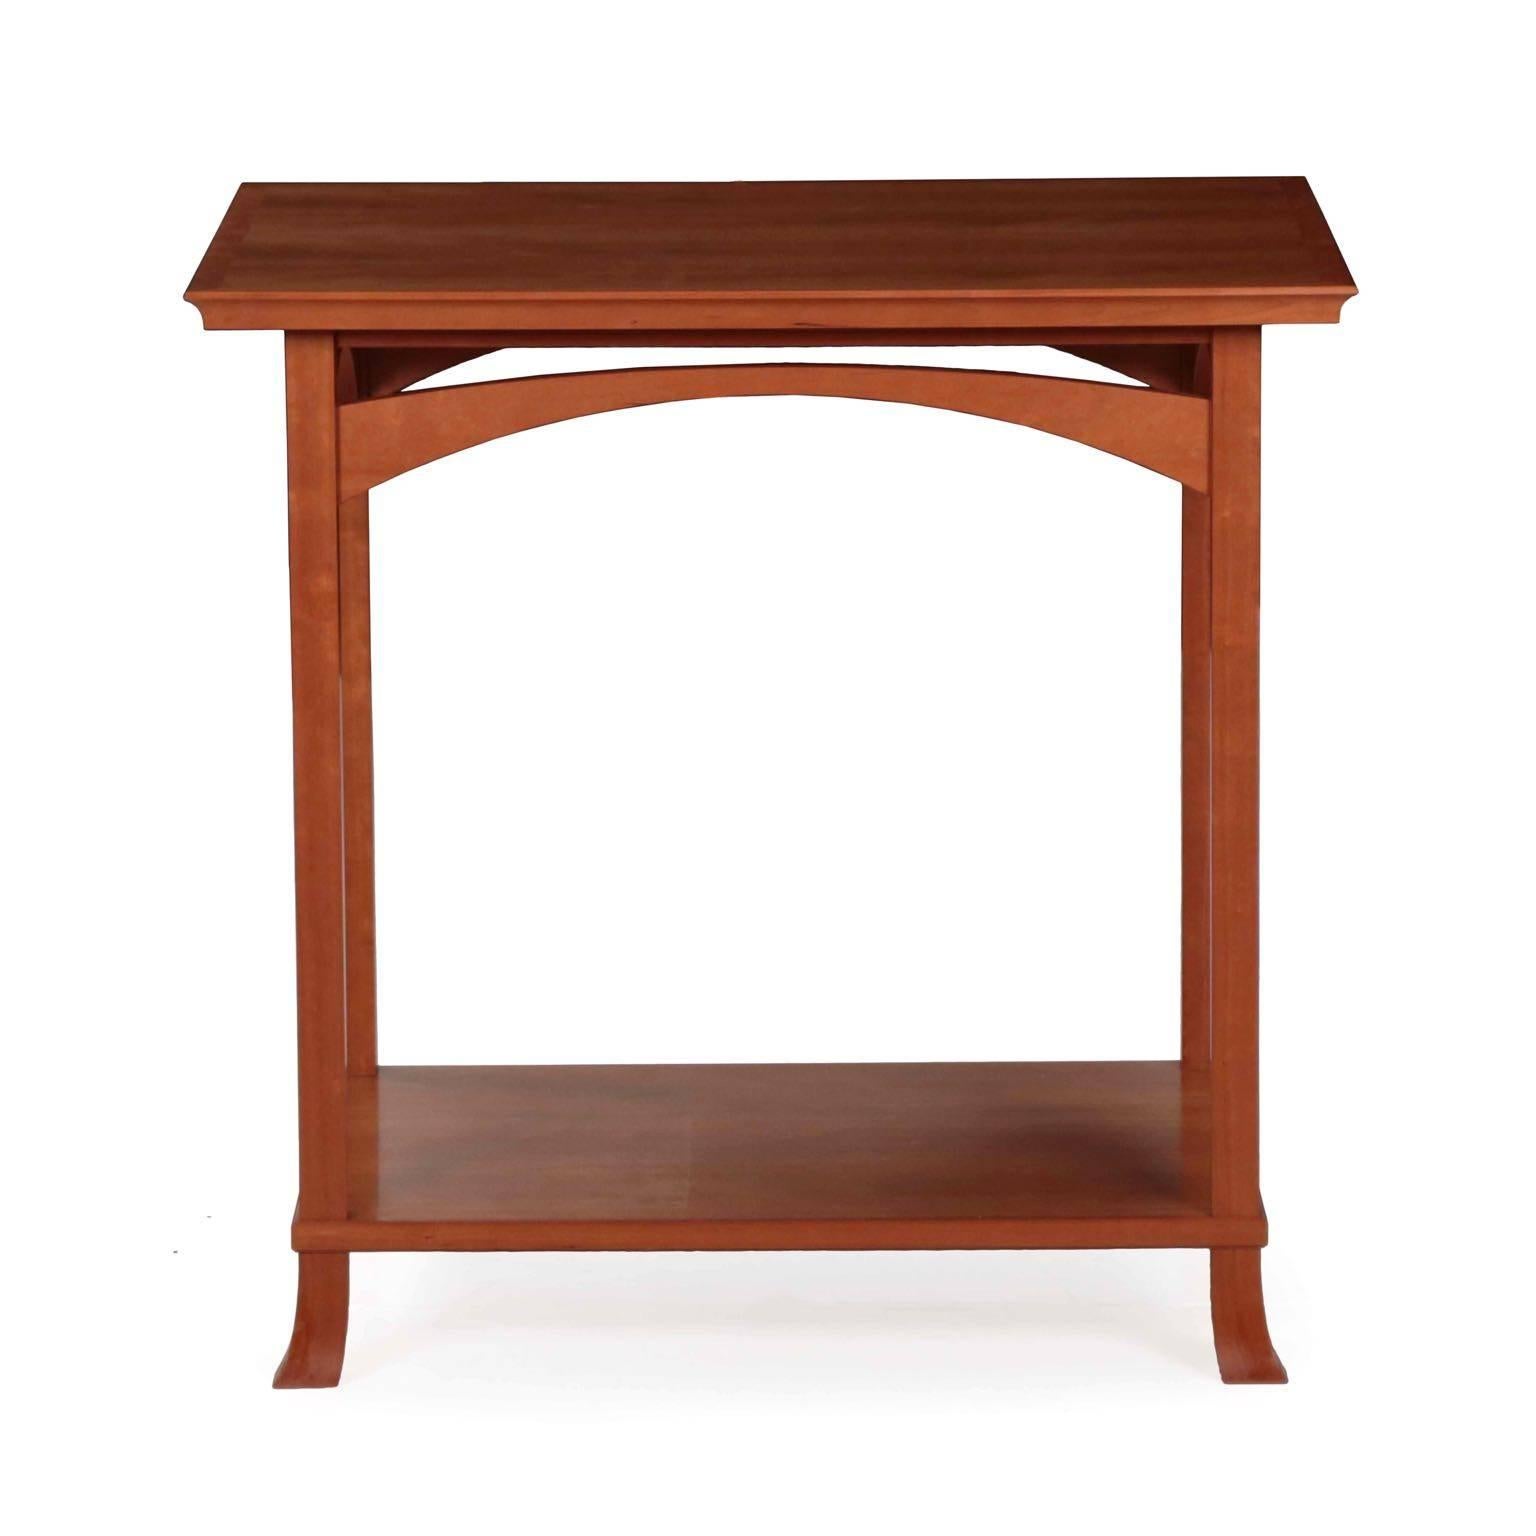 This is a very fine custom designed cherrywood side table by Newport Design Studio in Rhode Island; the signature of the actual craftsman executing it is somewhat illegibly scrolled to the underside of the top and dated ’98. We have copies of the